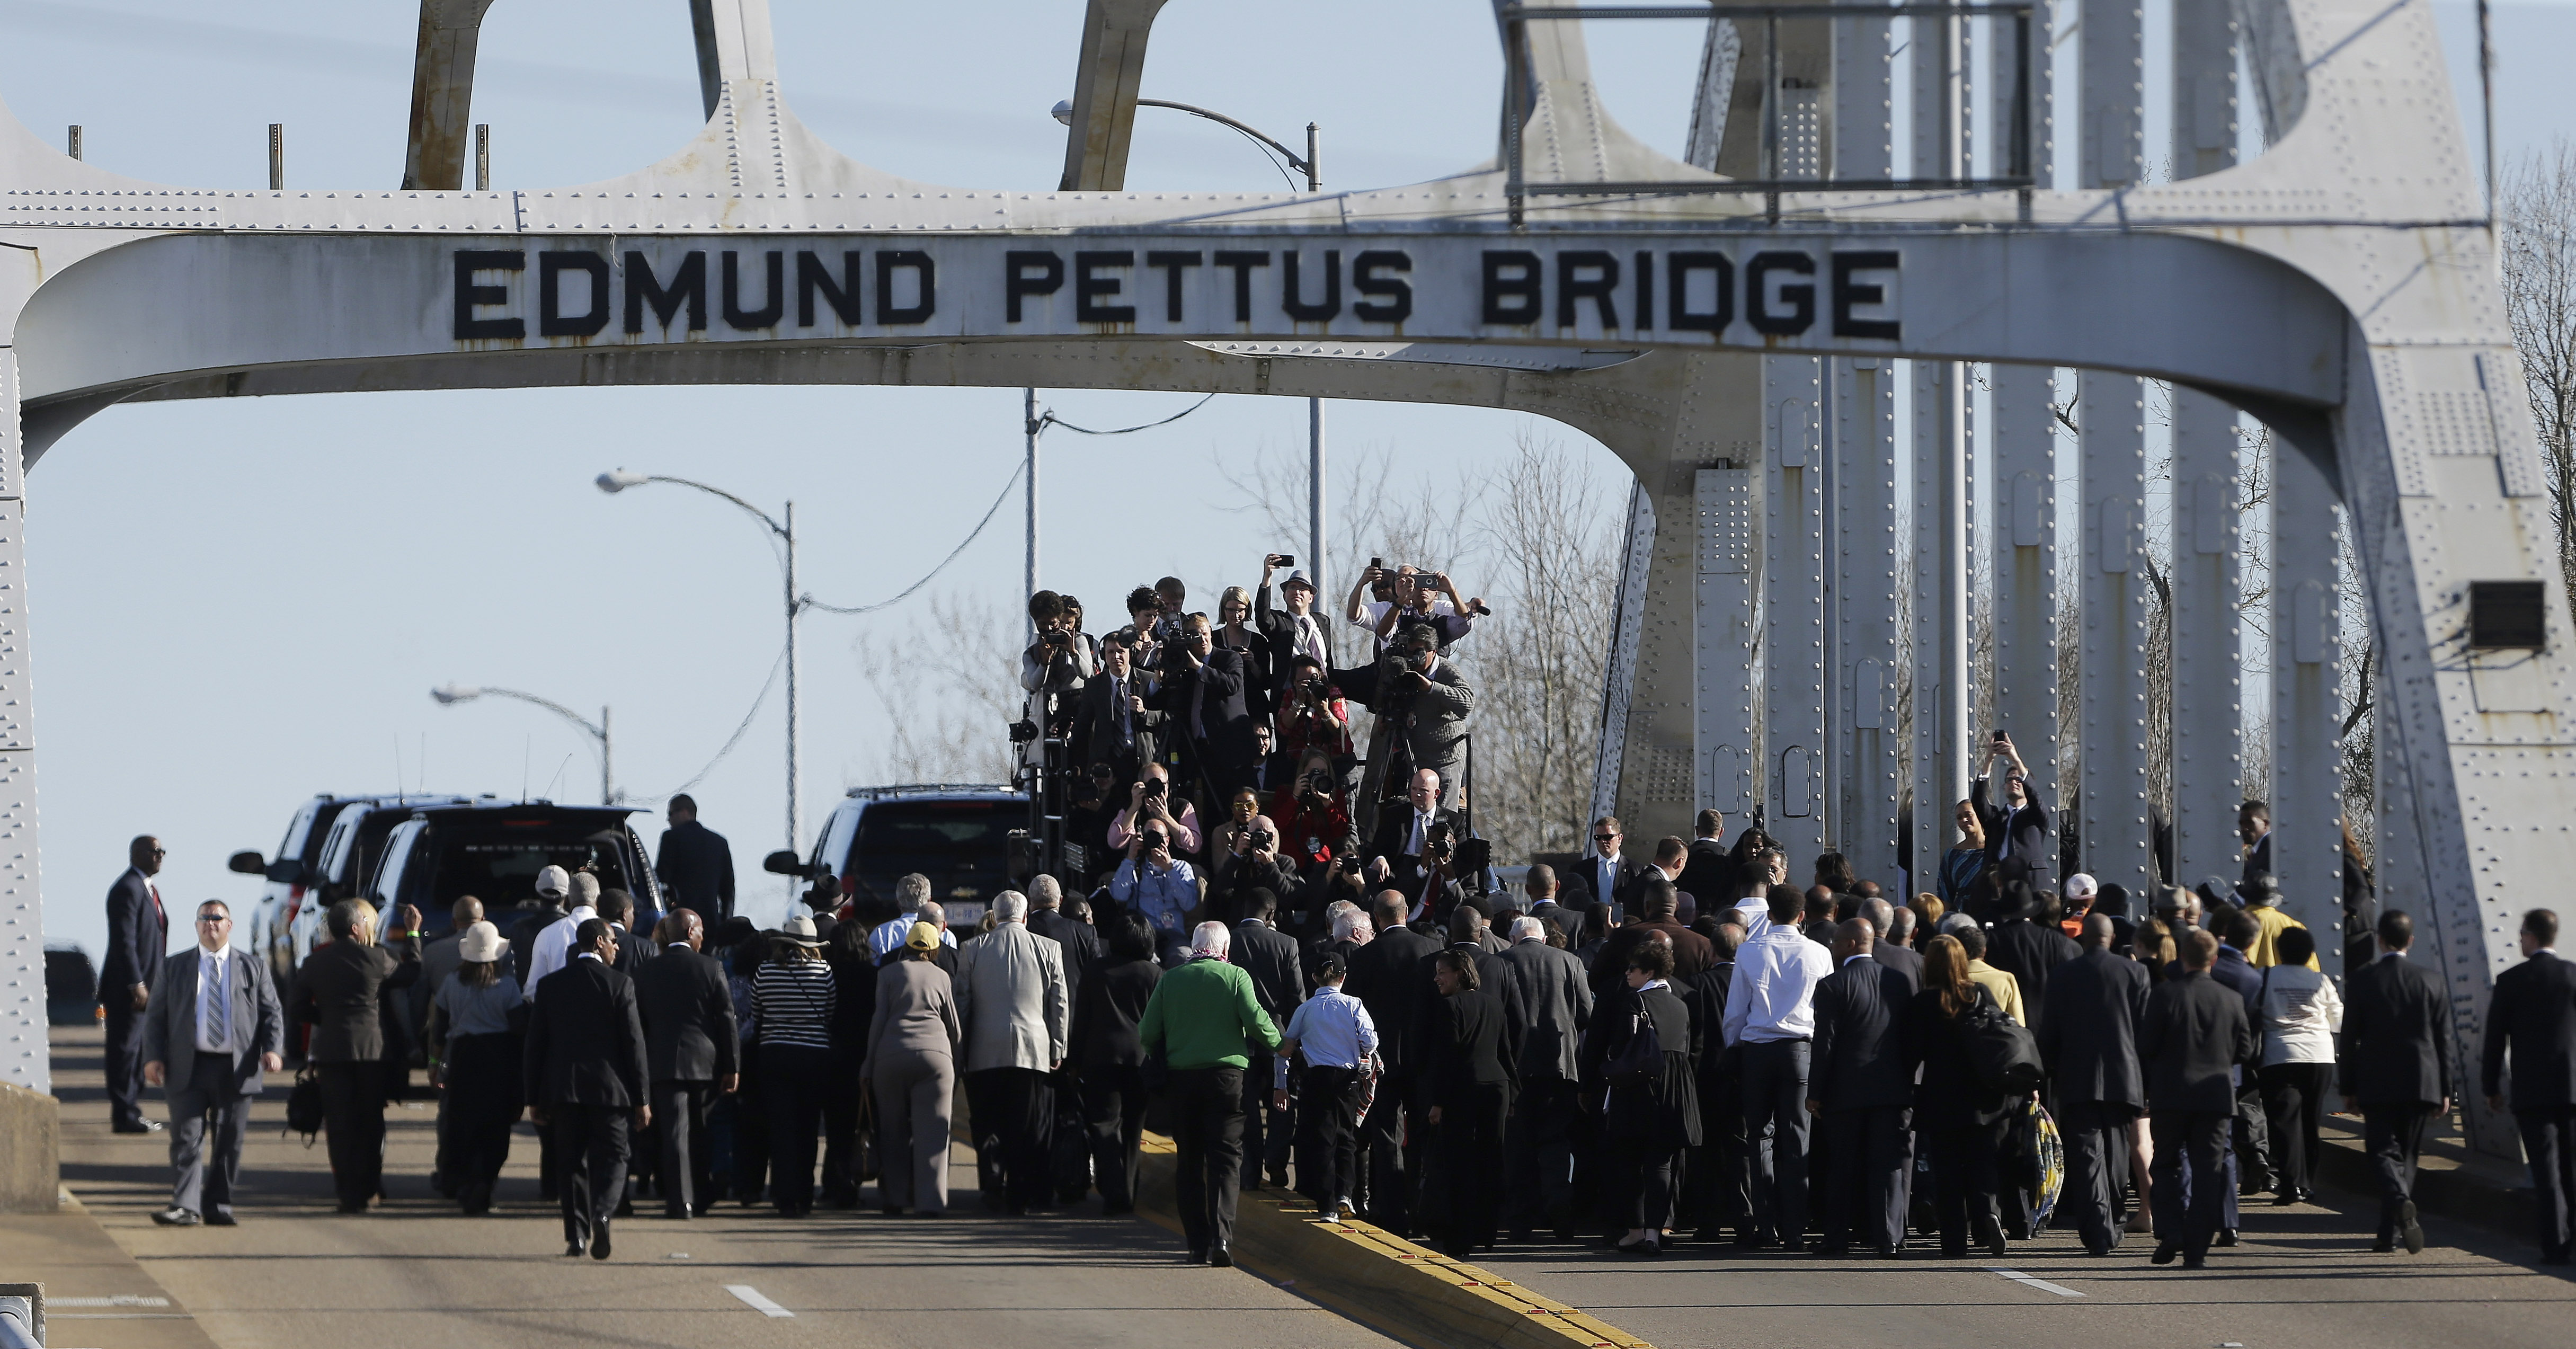 Selma civil rights milestone marked by first black president - The Blade